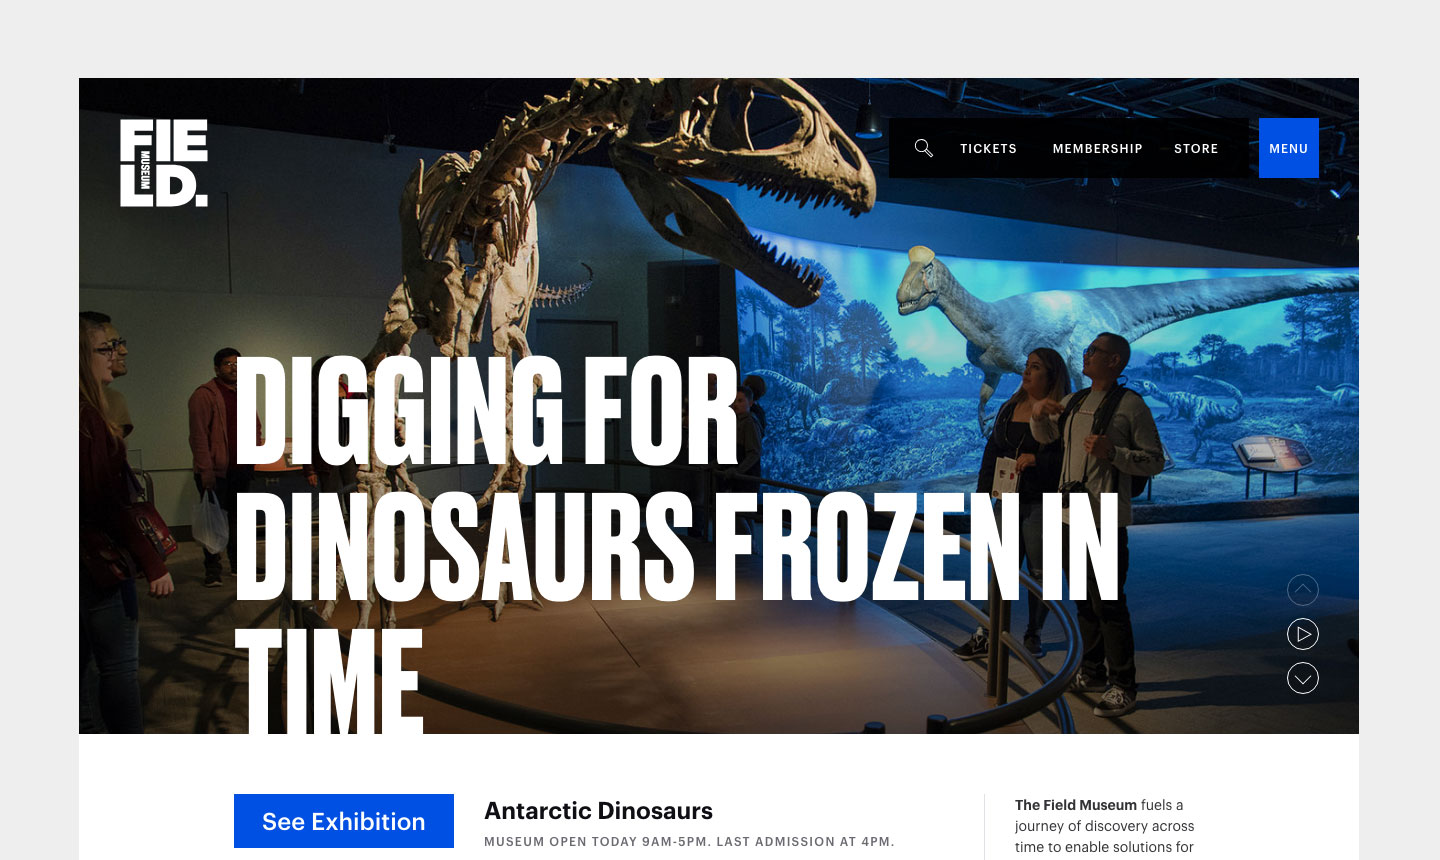 A screenshot of the Field Museum website featuring large text "Digging for Dinosaurs Frozen in Time" over a full-screen background image of visitors looking at a T-rex skeleton. A small menu appears in the upper right.